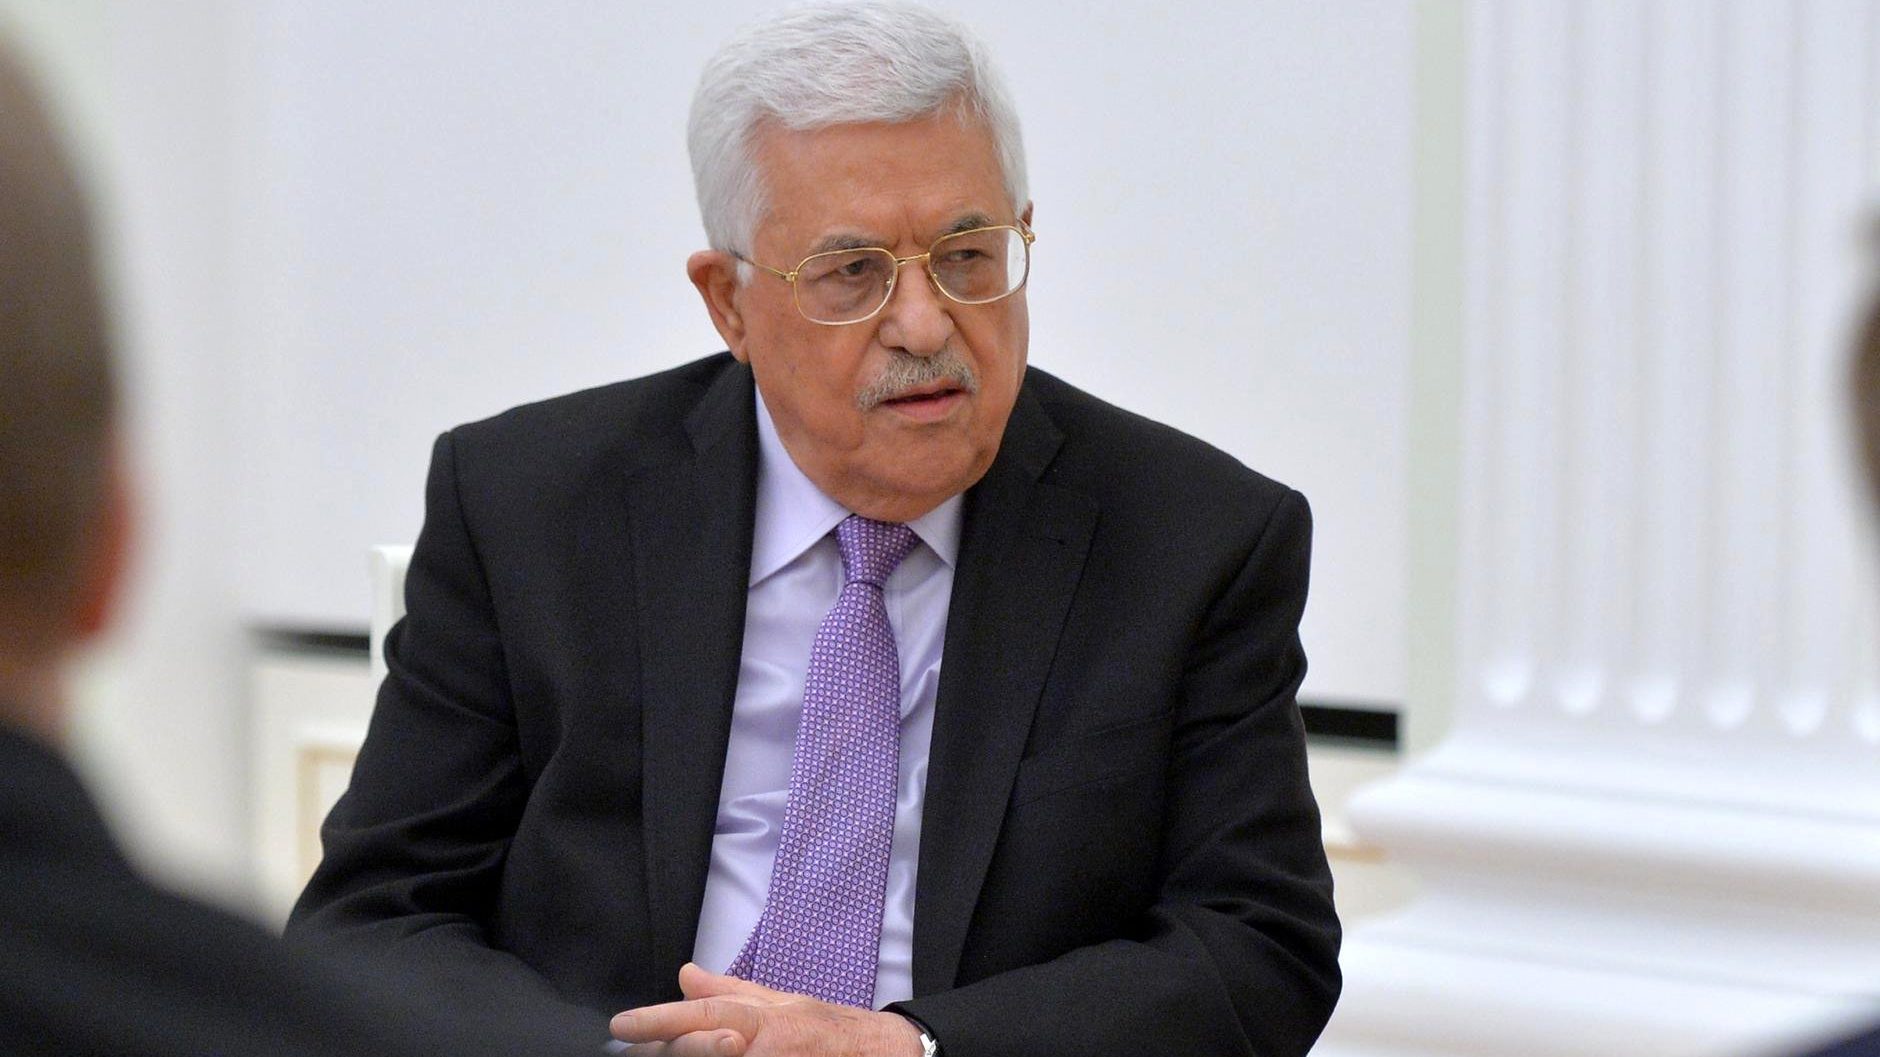 Palestinian Authority Will Finally Hold Elections